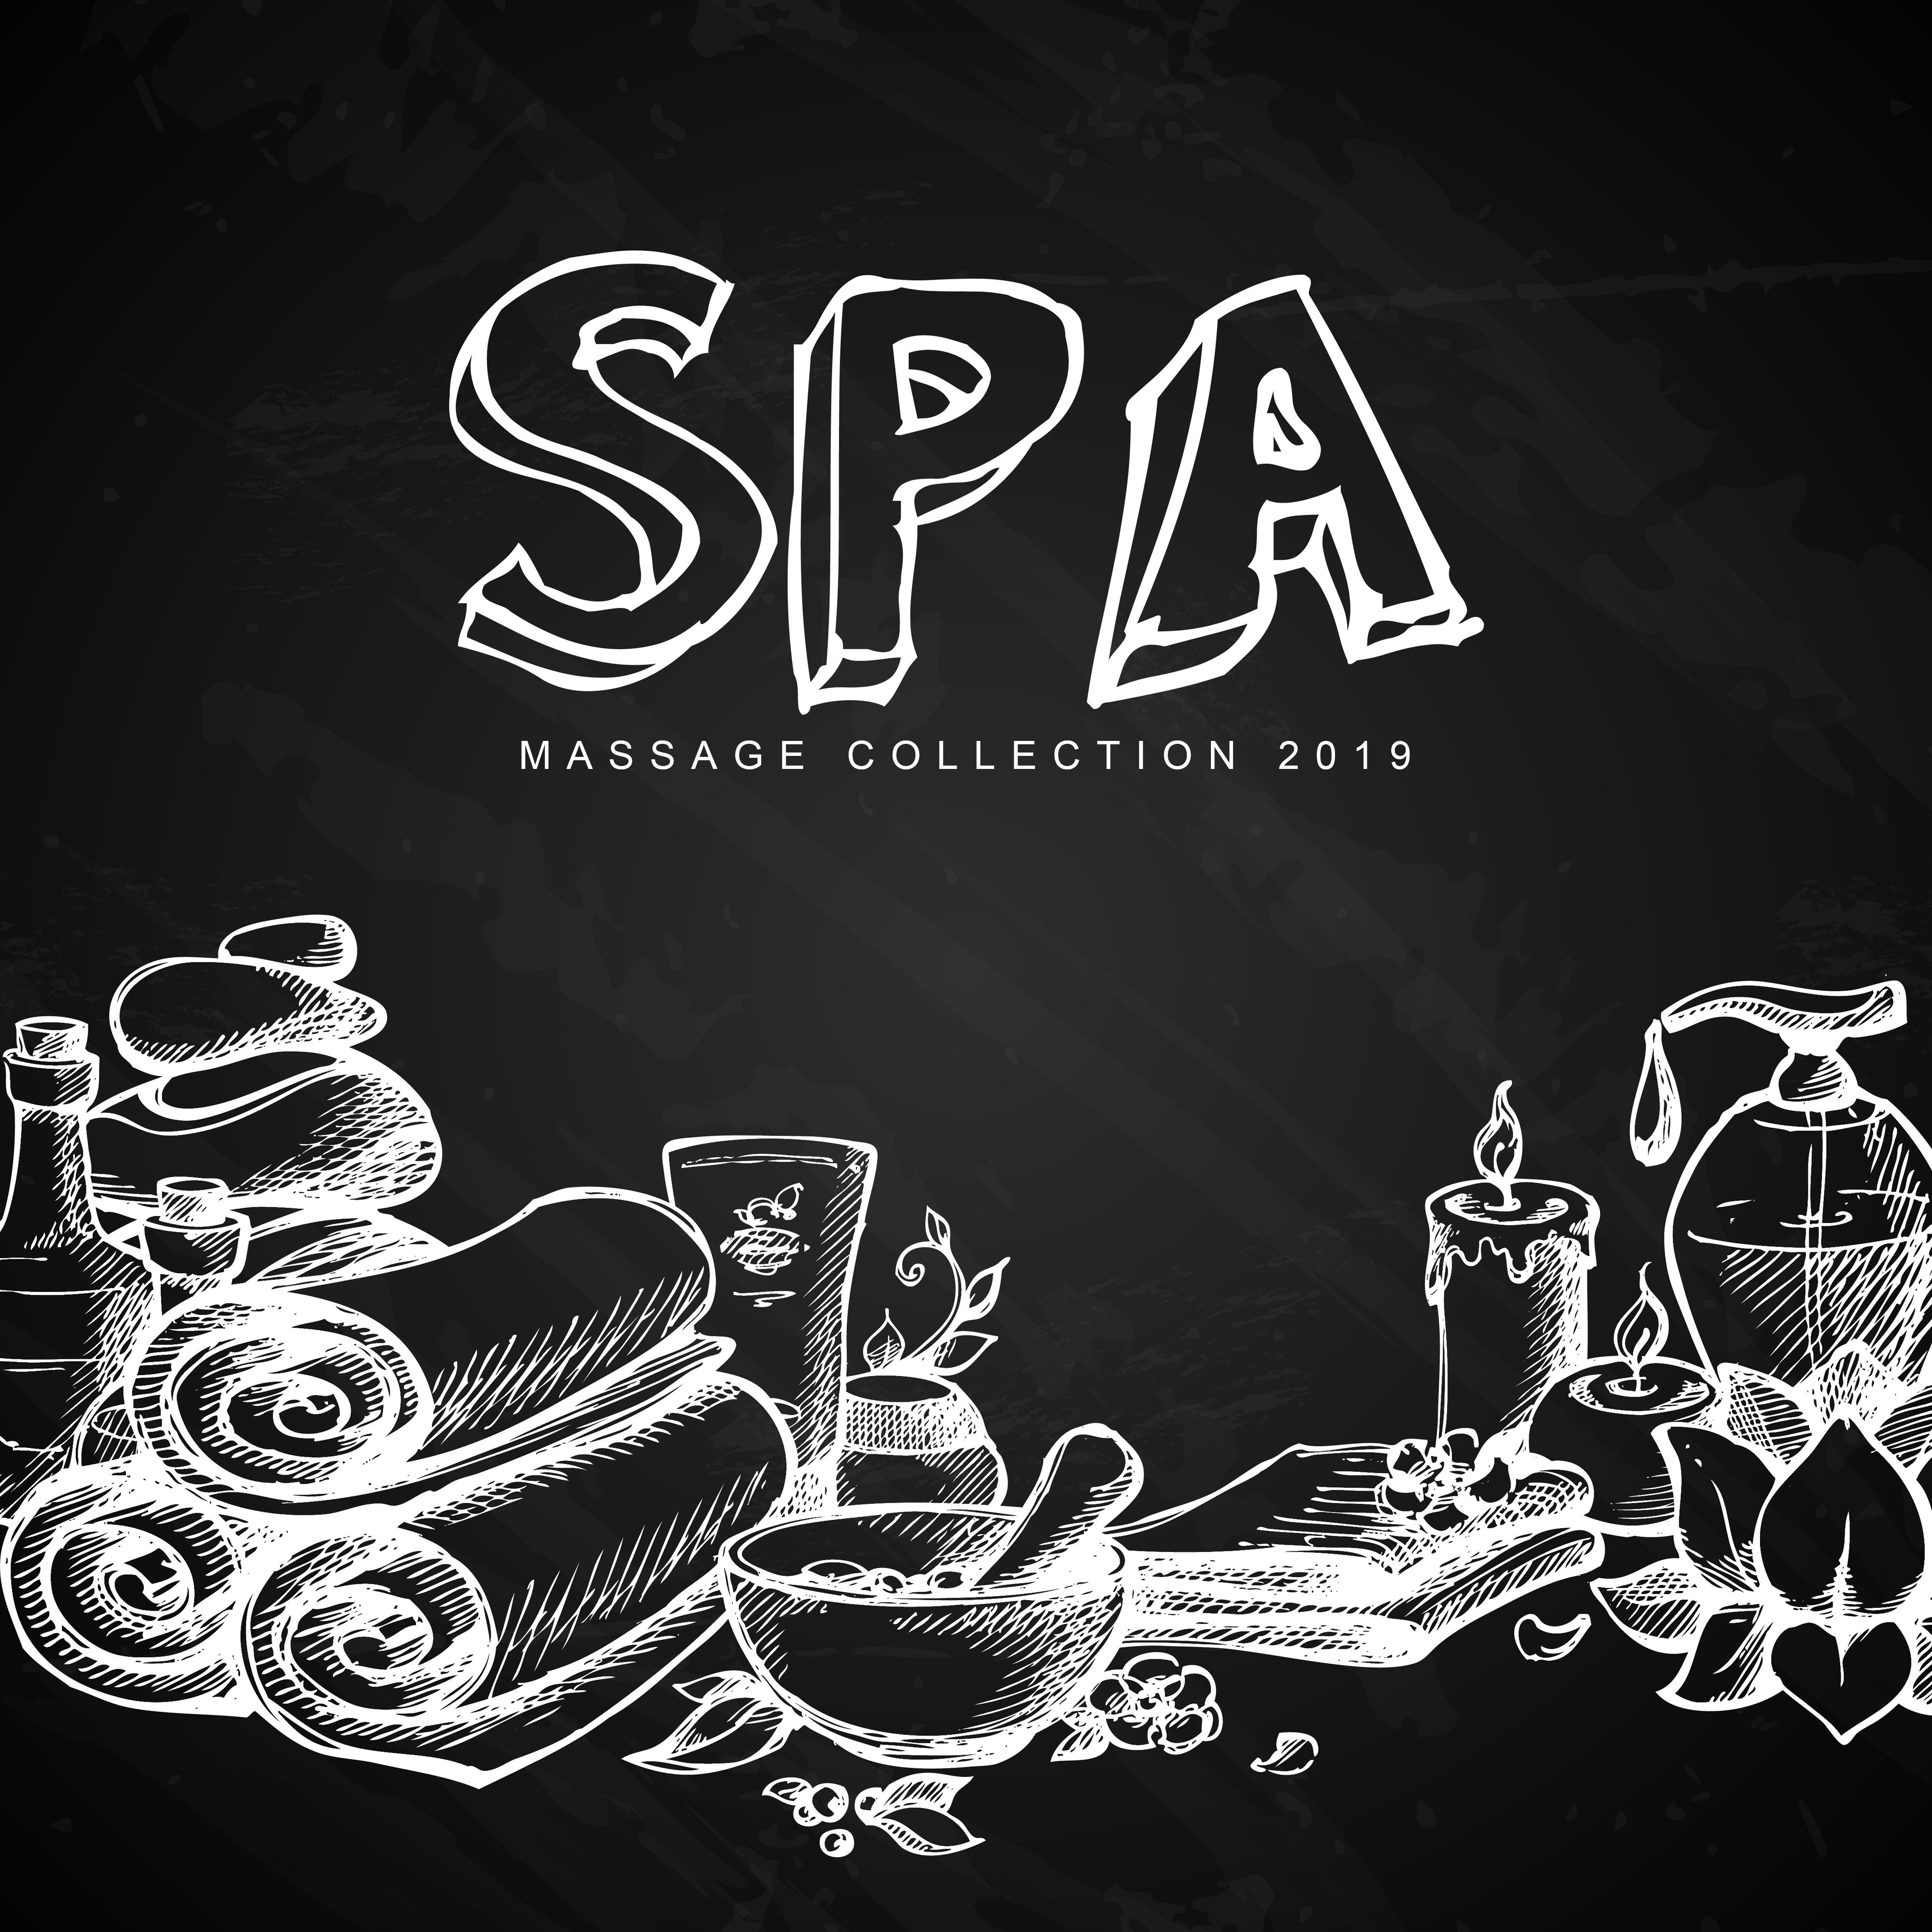 Spa Massage Collection 2019: Zen Lounge, Relaxing Music Therapy, Sensual Massage, Spa Tracks for Relaxation & Rest, Reduce Stress, Spa 2019